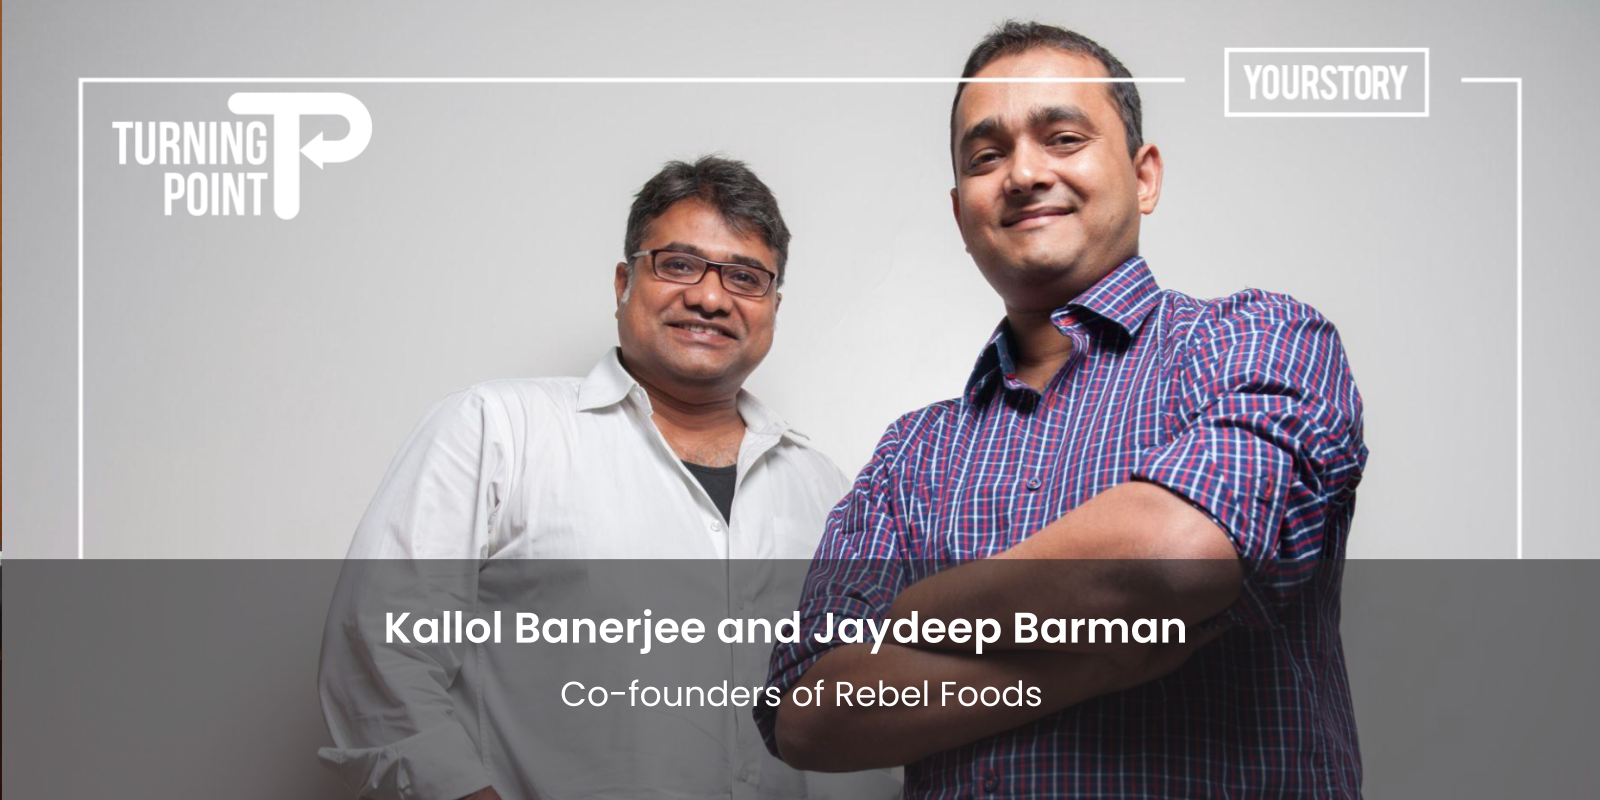 [The Turning Point] How adopting a cloud-kitchen model helped Faasos transform into foodtech unicorn Rebel Foods